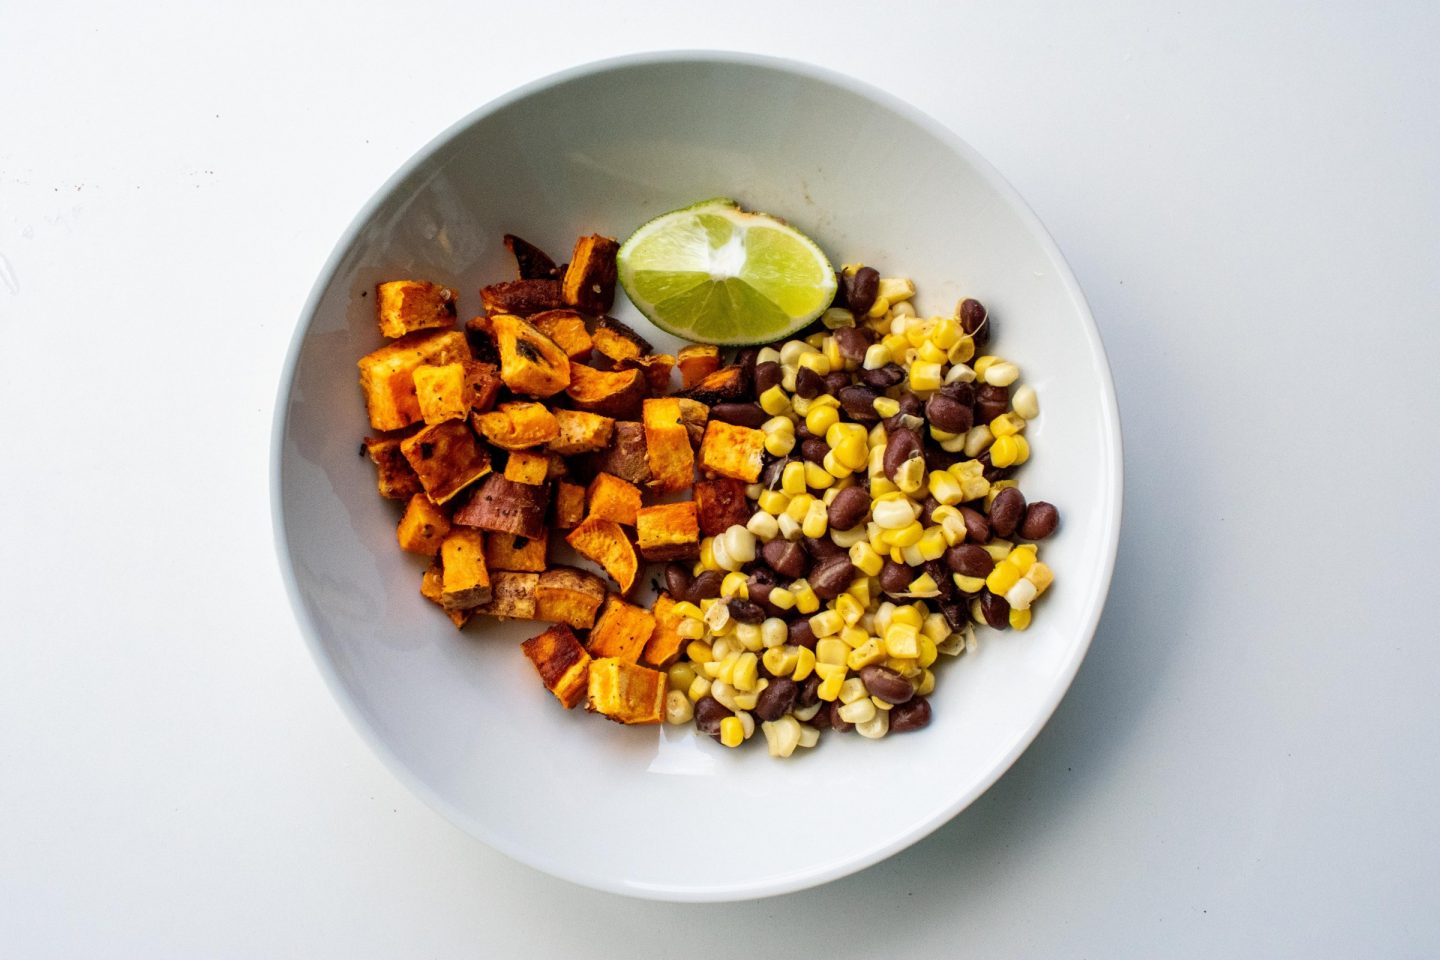 This week's meal prep is a delicious southwest sweet potato bowl—it's healthy, vegan, and full of smoky-sweet flavor! Click through for my full review!